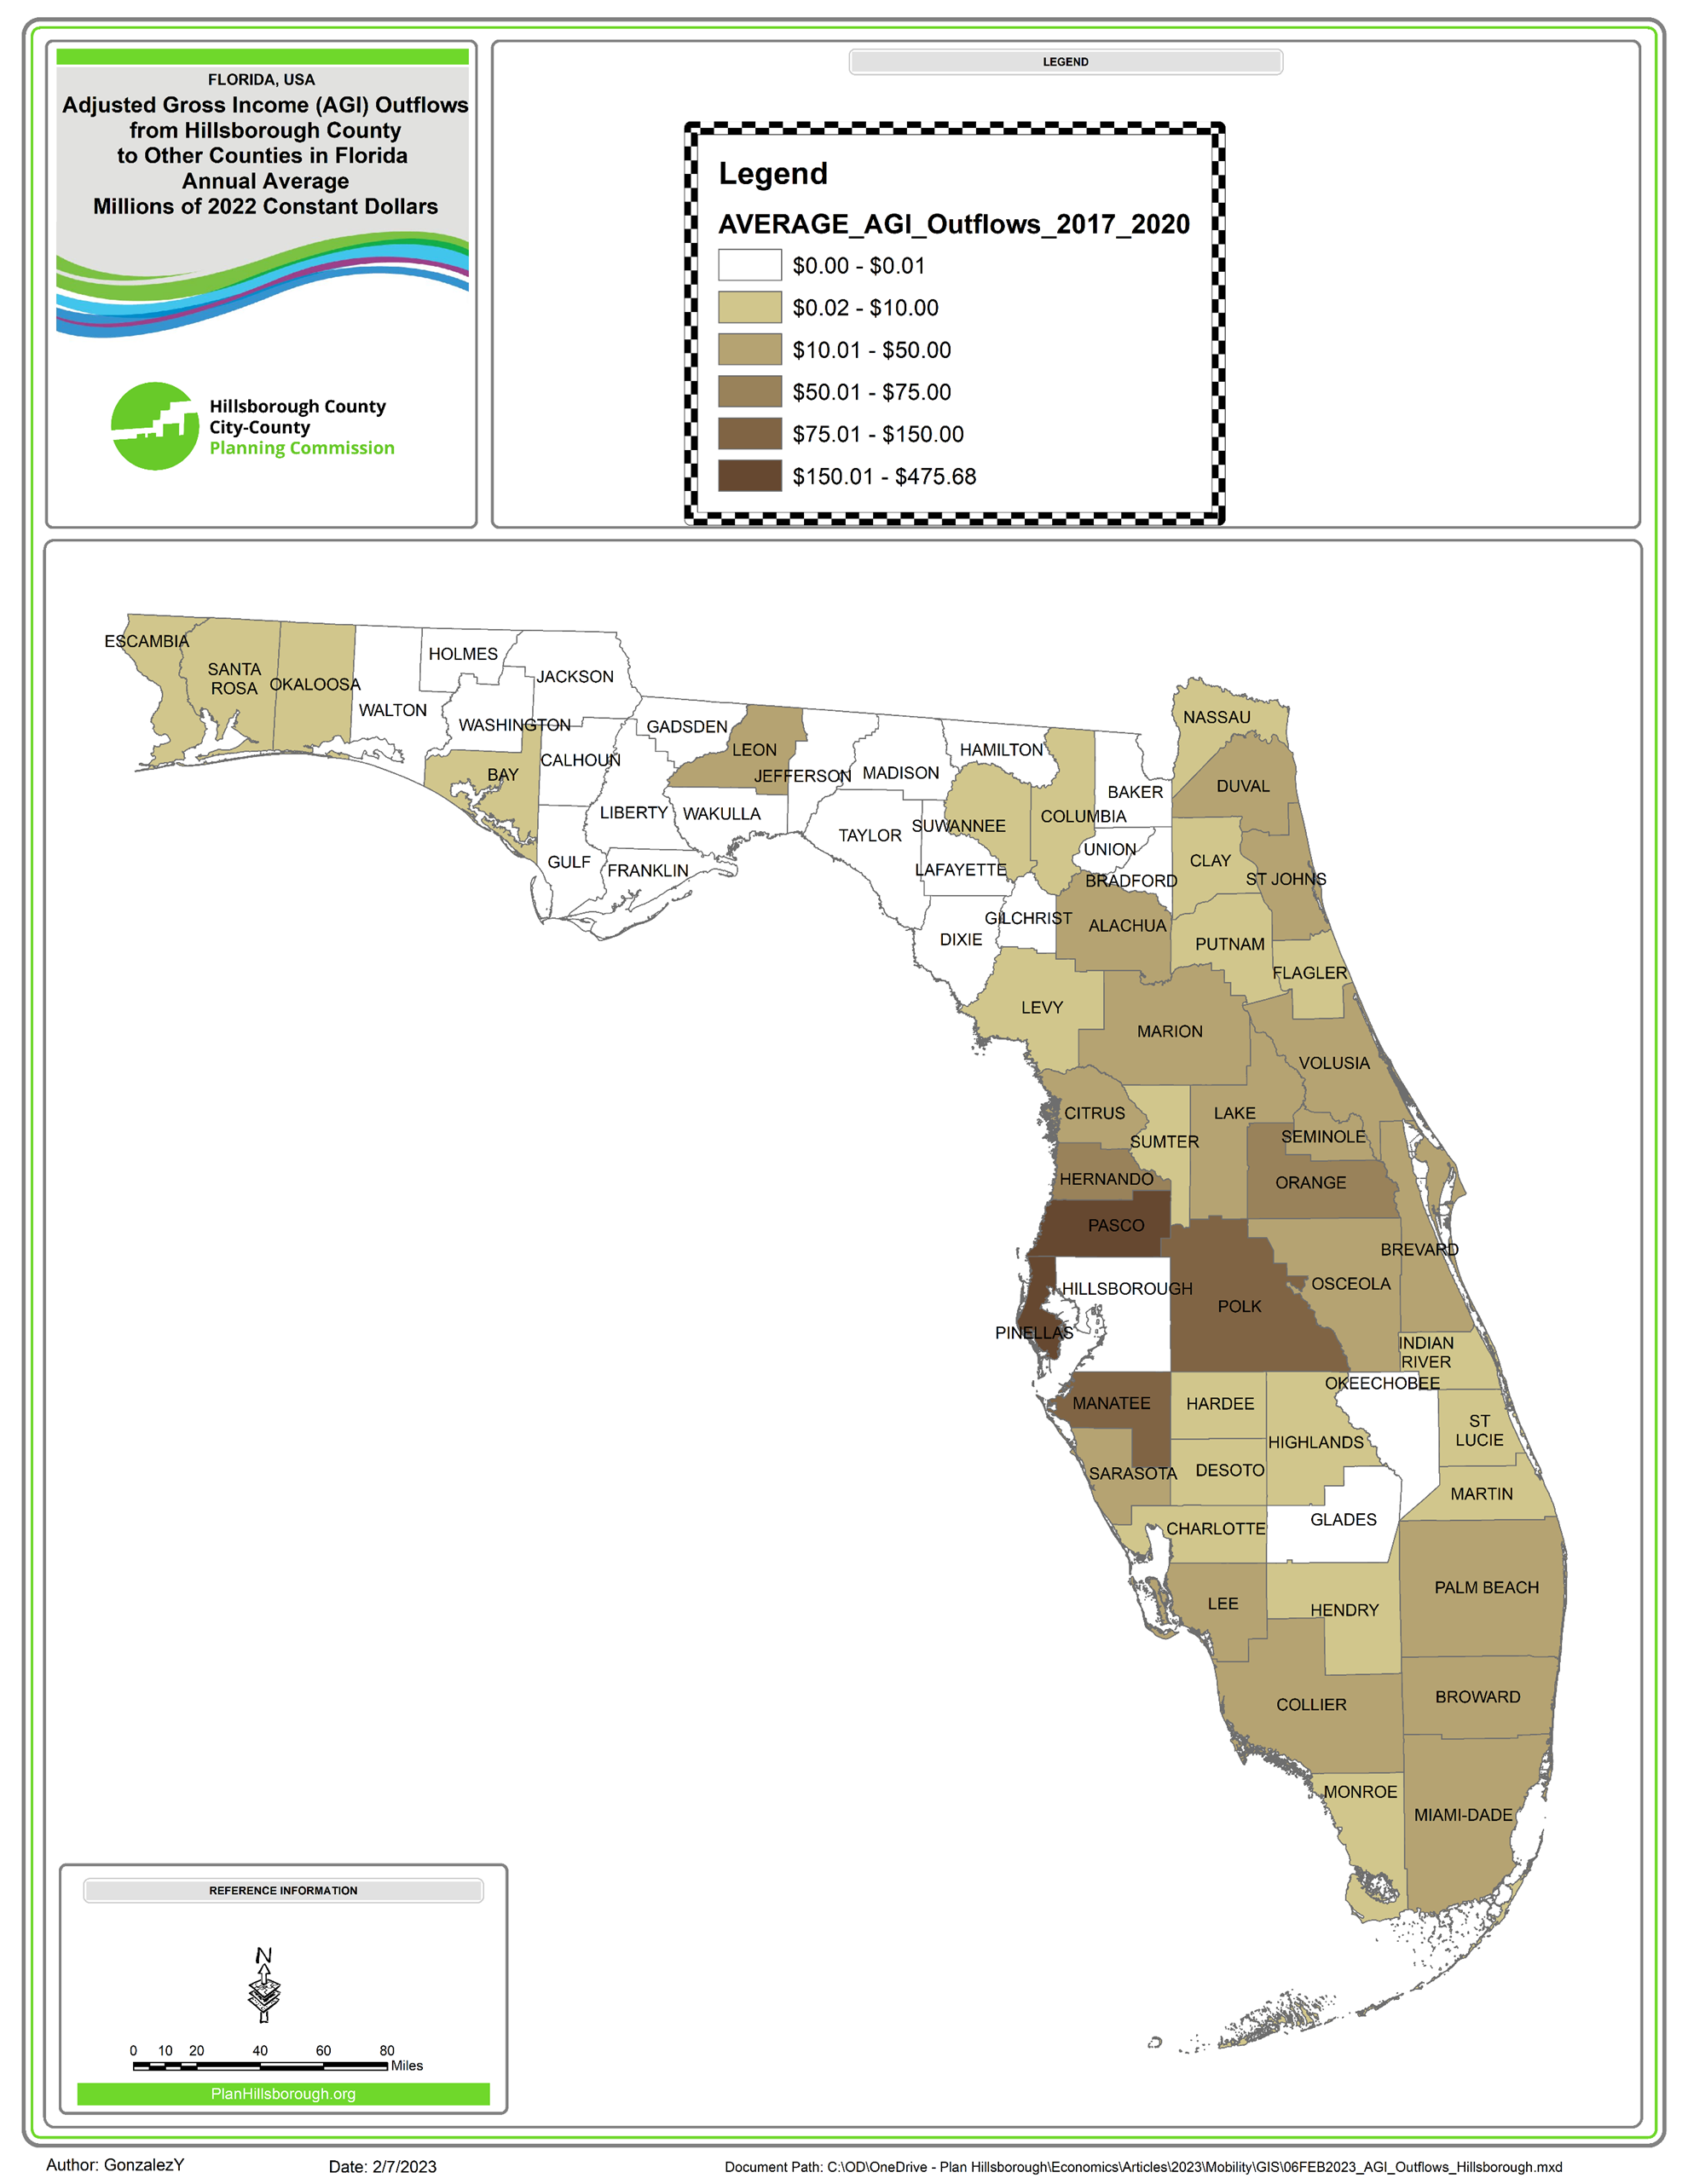 Map shows destination Florida Counties for AGI of former Hillsborough County residents.  Manatee, Pasco, Pinellas, and Polk receive more than $75 million from Hillsborough County yearly.